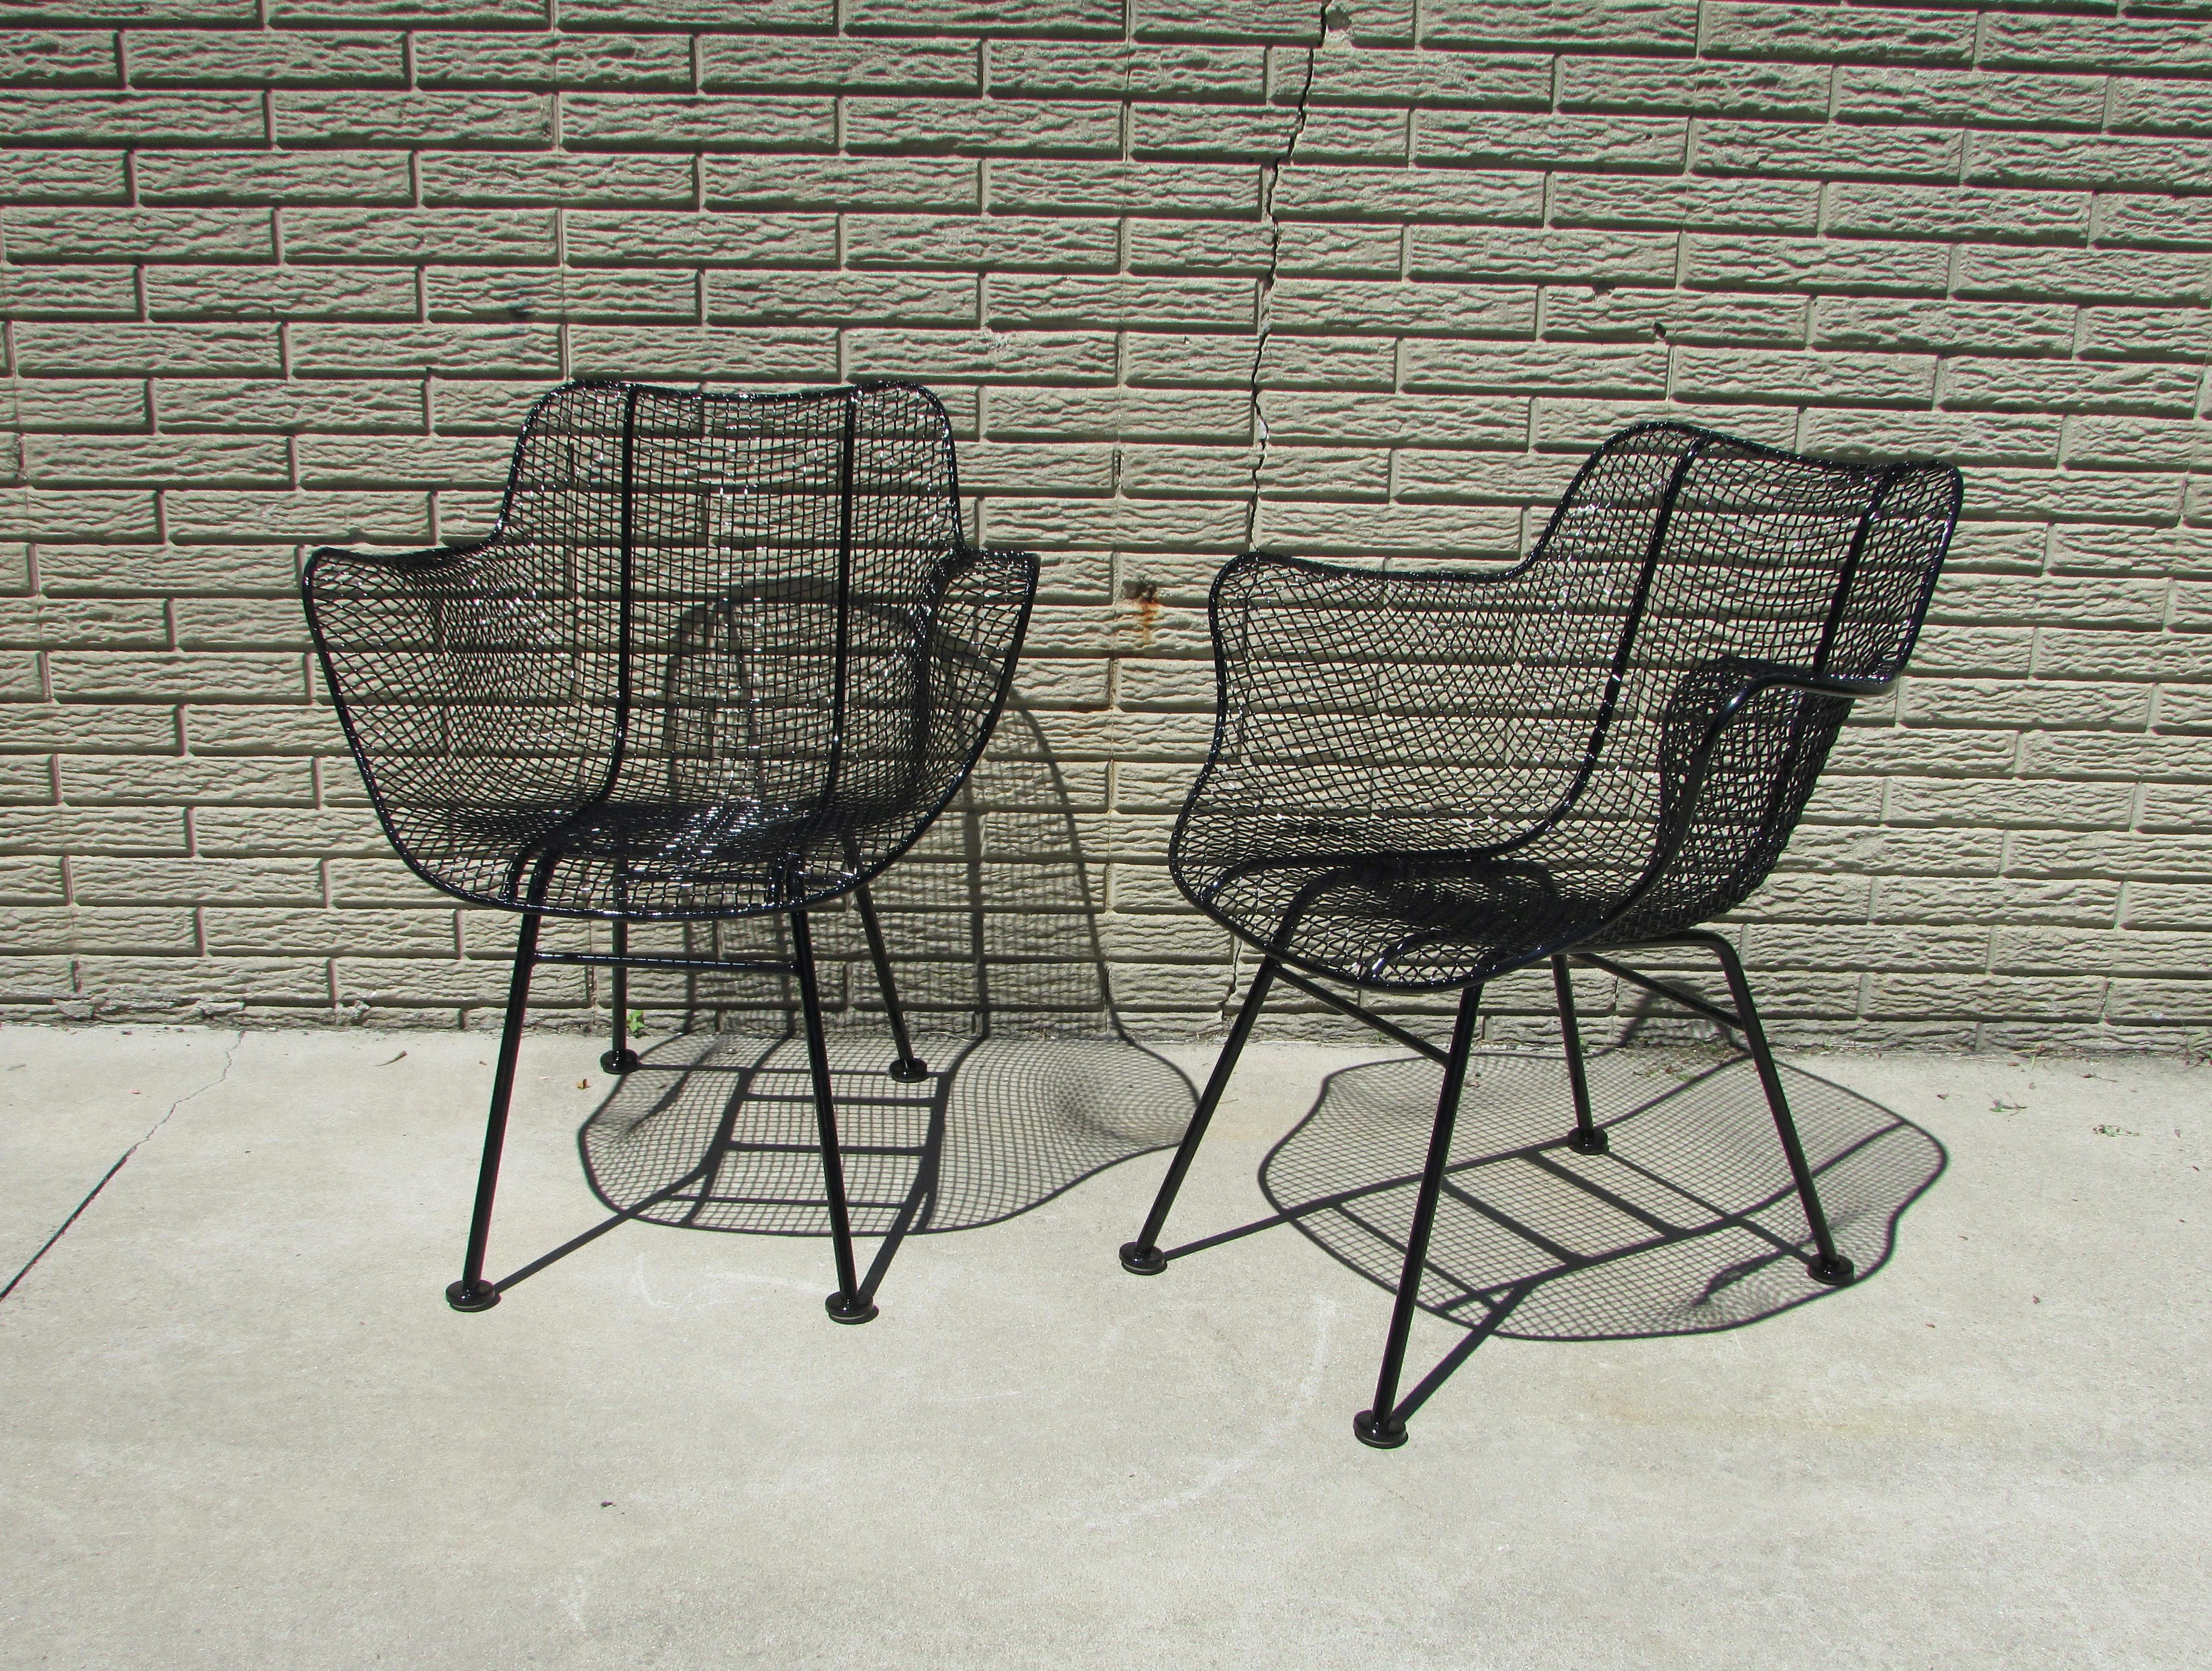 Pair of Woodard wrought iron framed chairs with steel wire mesh forming the seat and backrest . Recently disassembled powder coated in gloss black. New foot glides added as well.